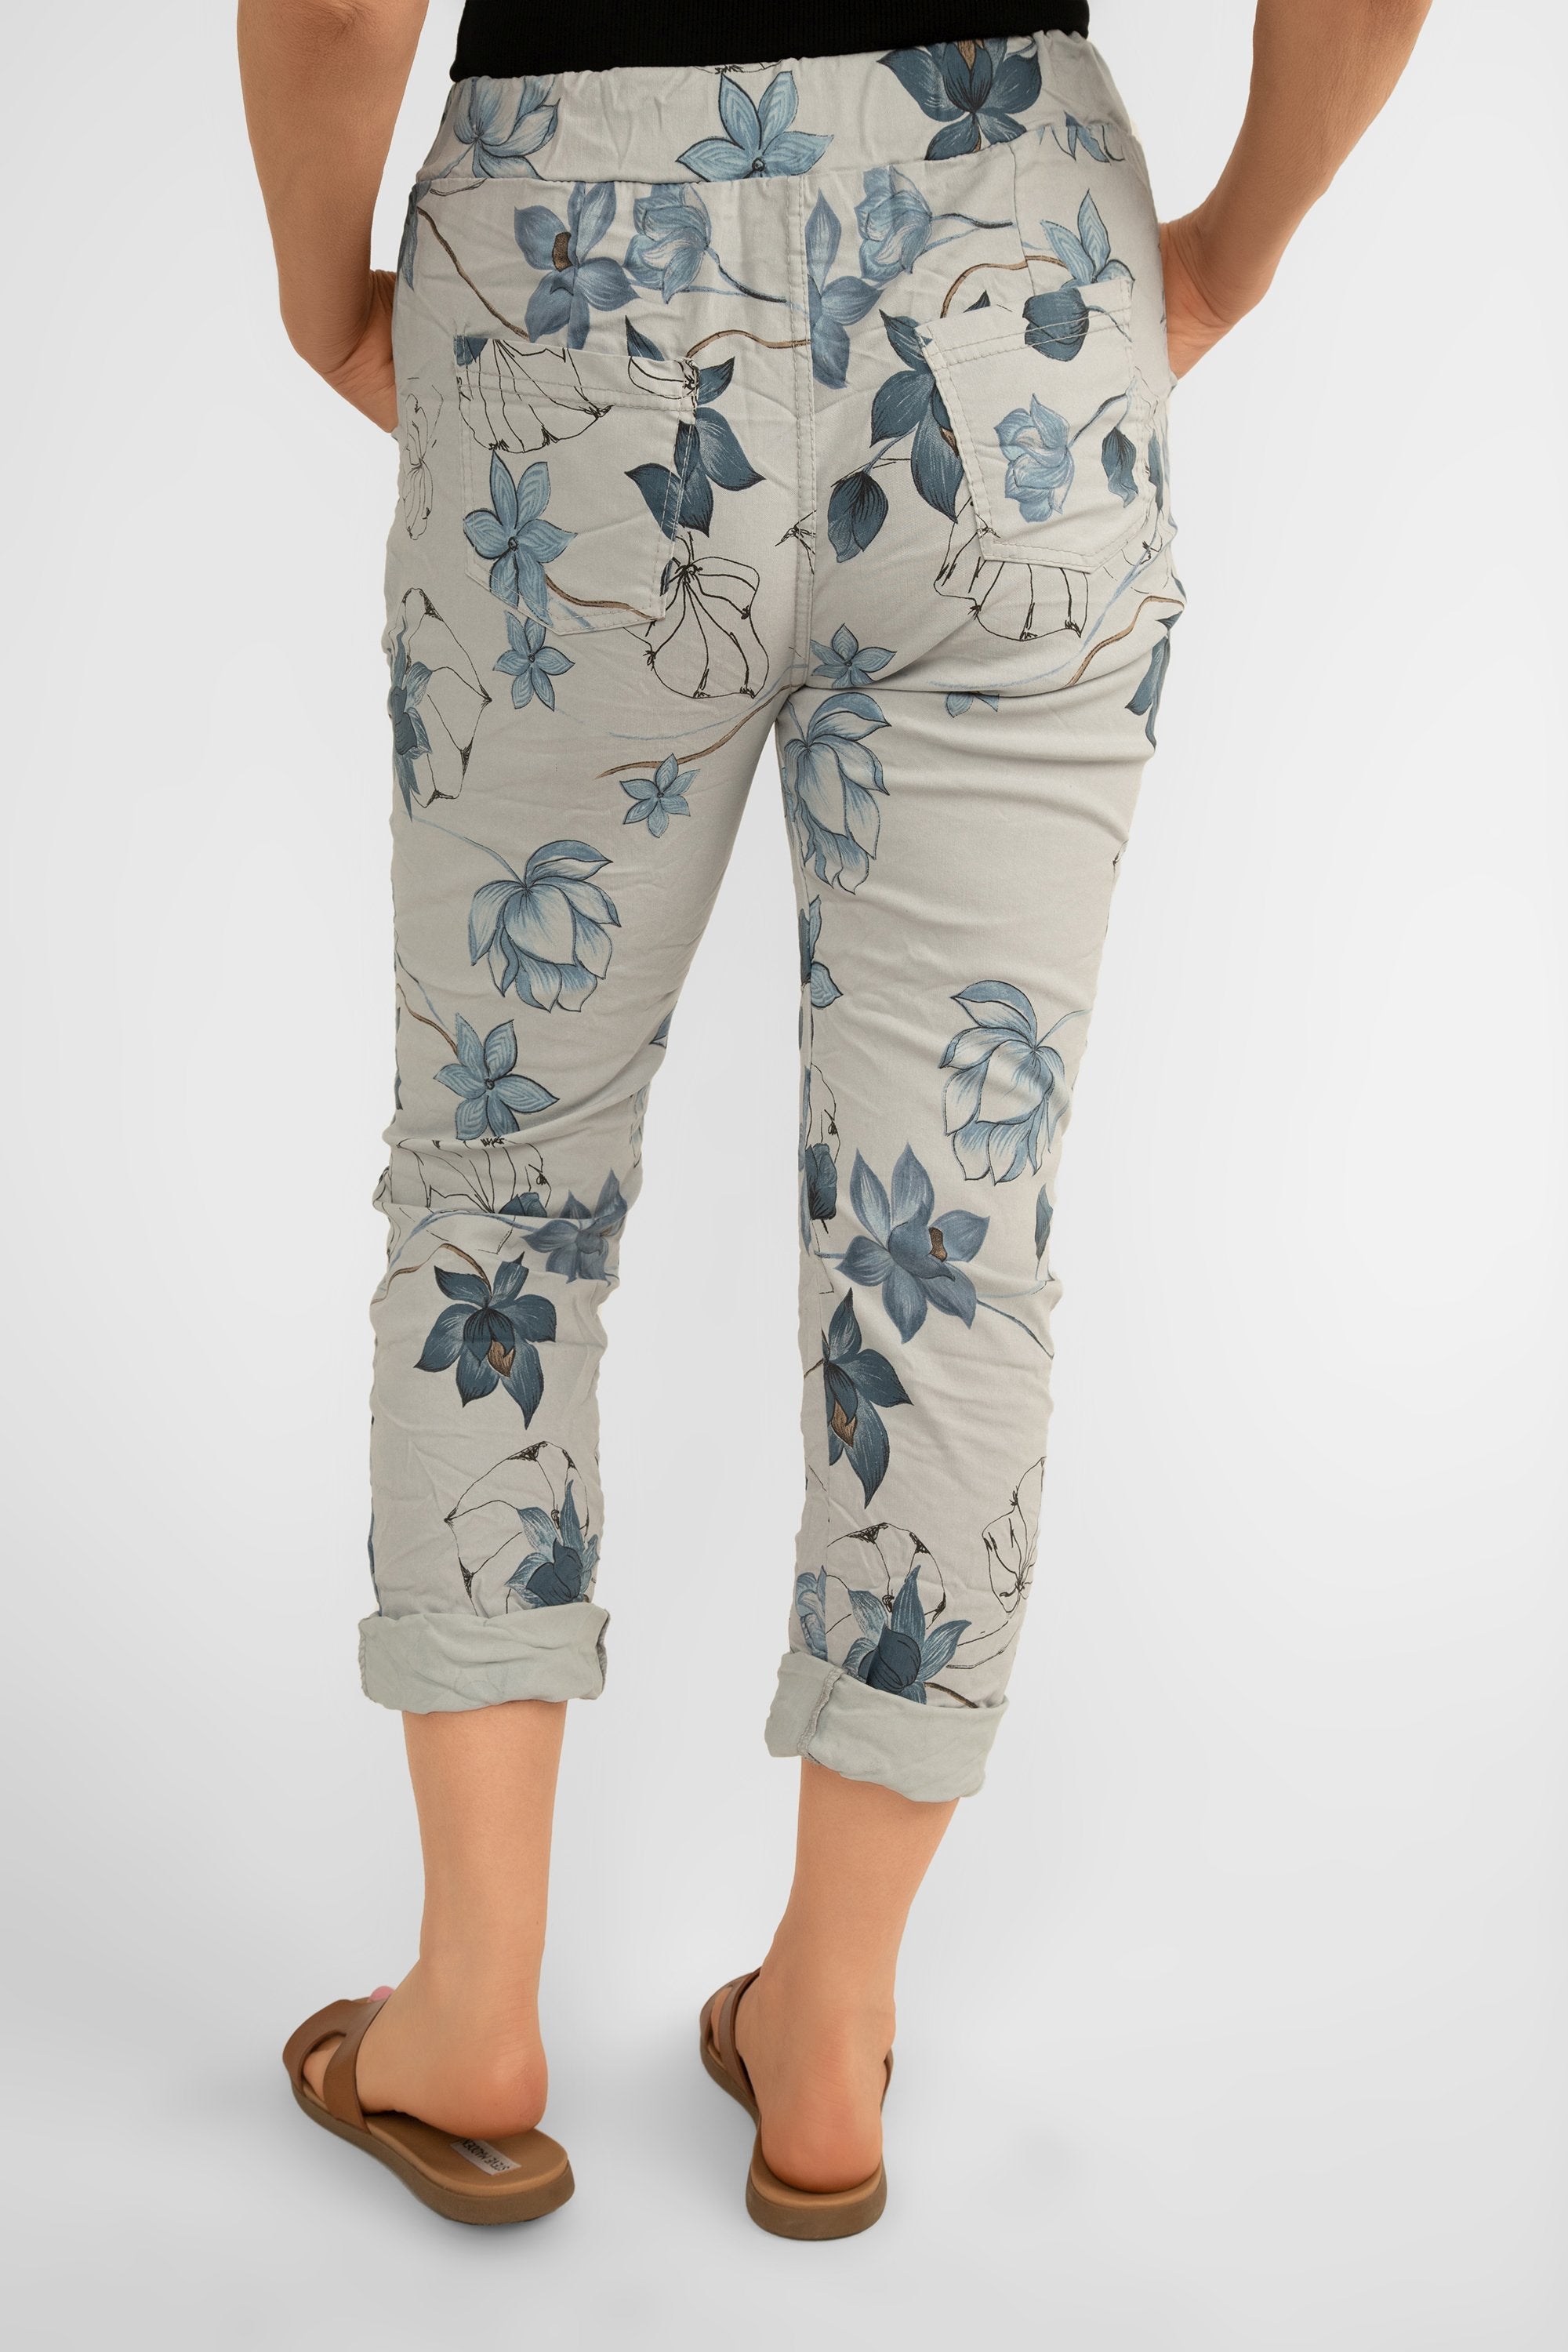 Back view of Bella Amore (21036) Women's Pull On Crinkle Pants with Side Pockets, Rolled Hem, and Blue Lotus Flower Print in Grey